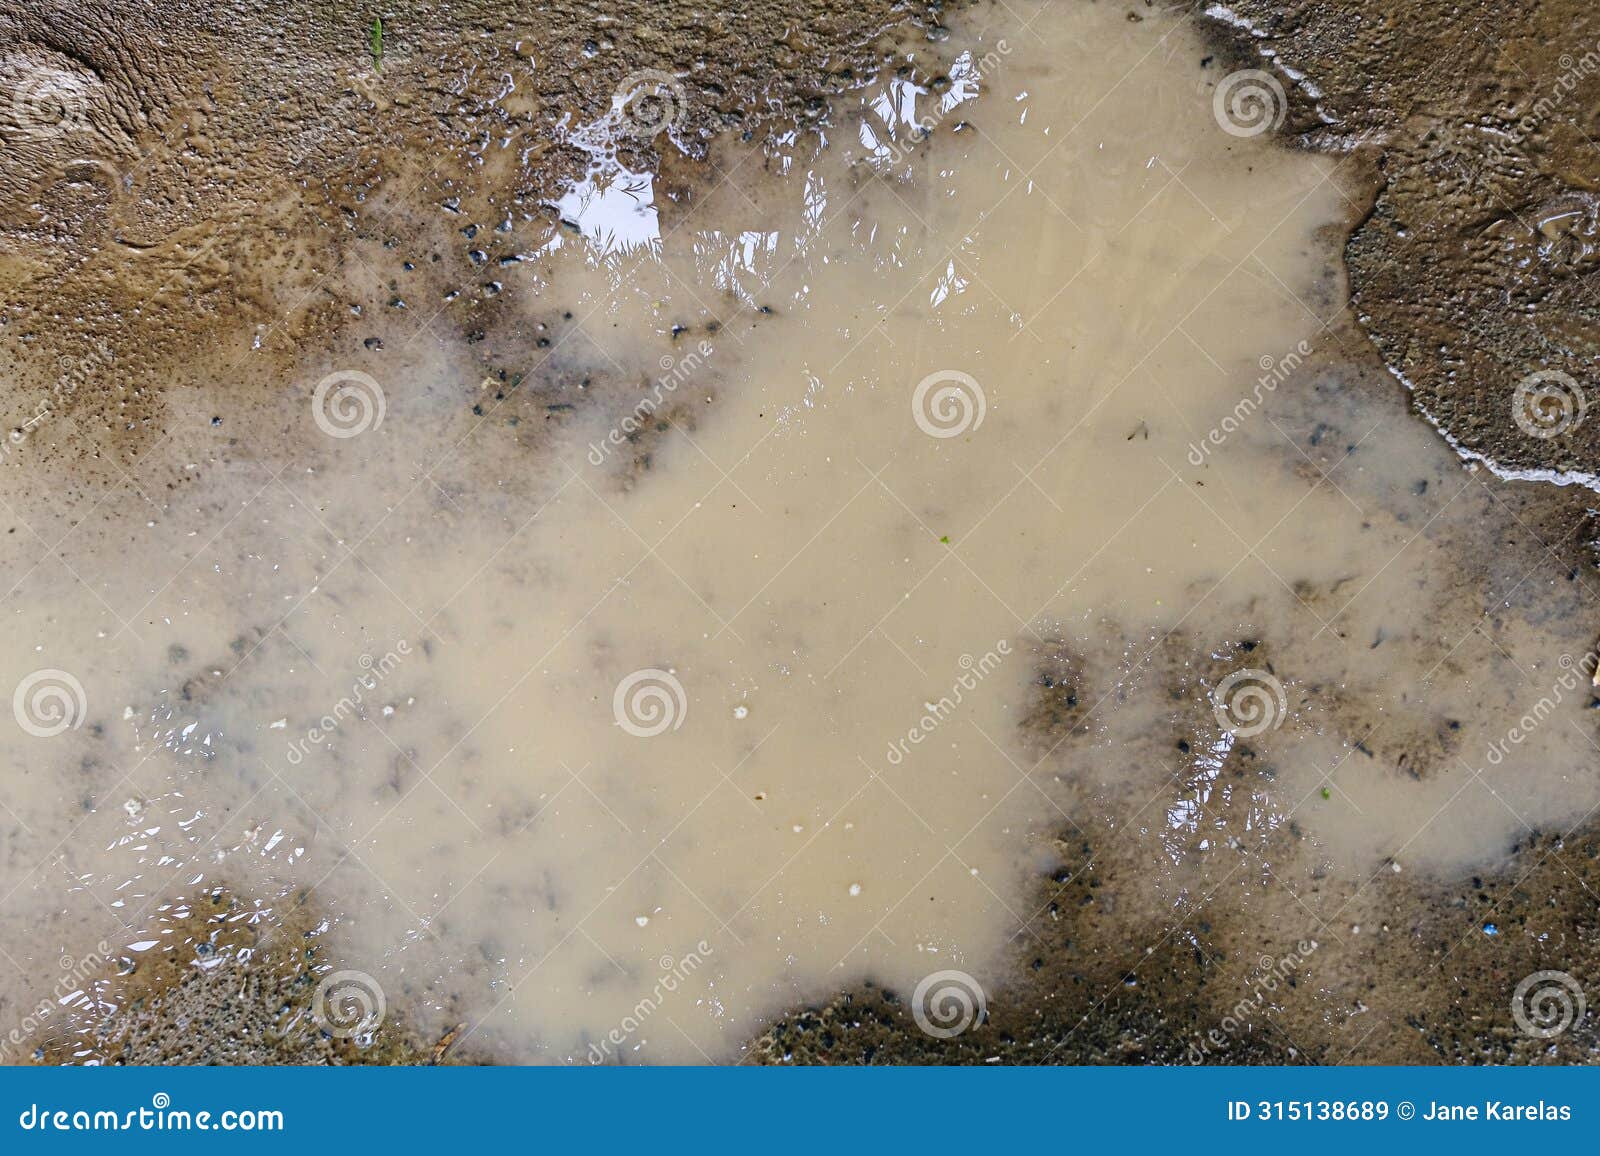 murky water puddle on dirt ground grunge texture